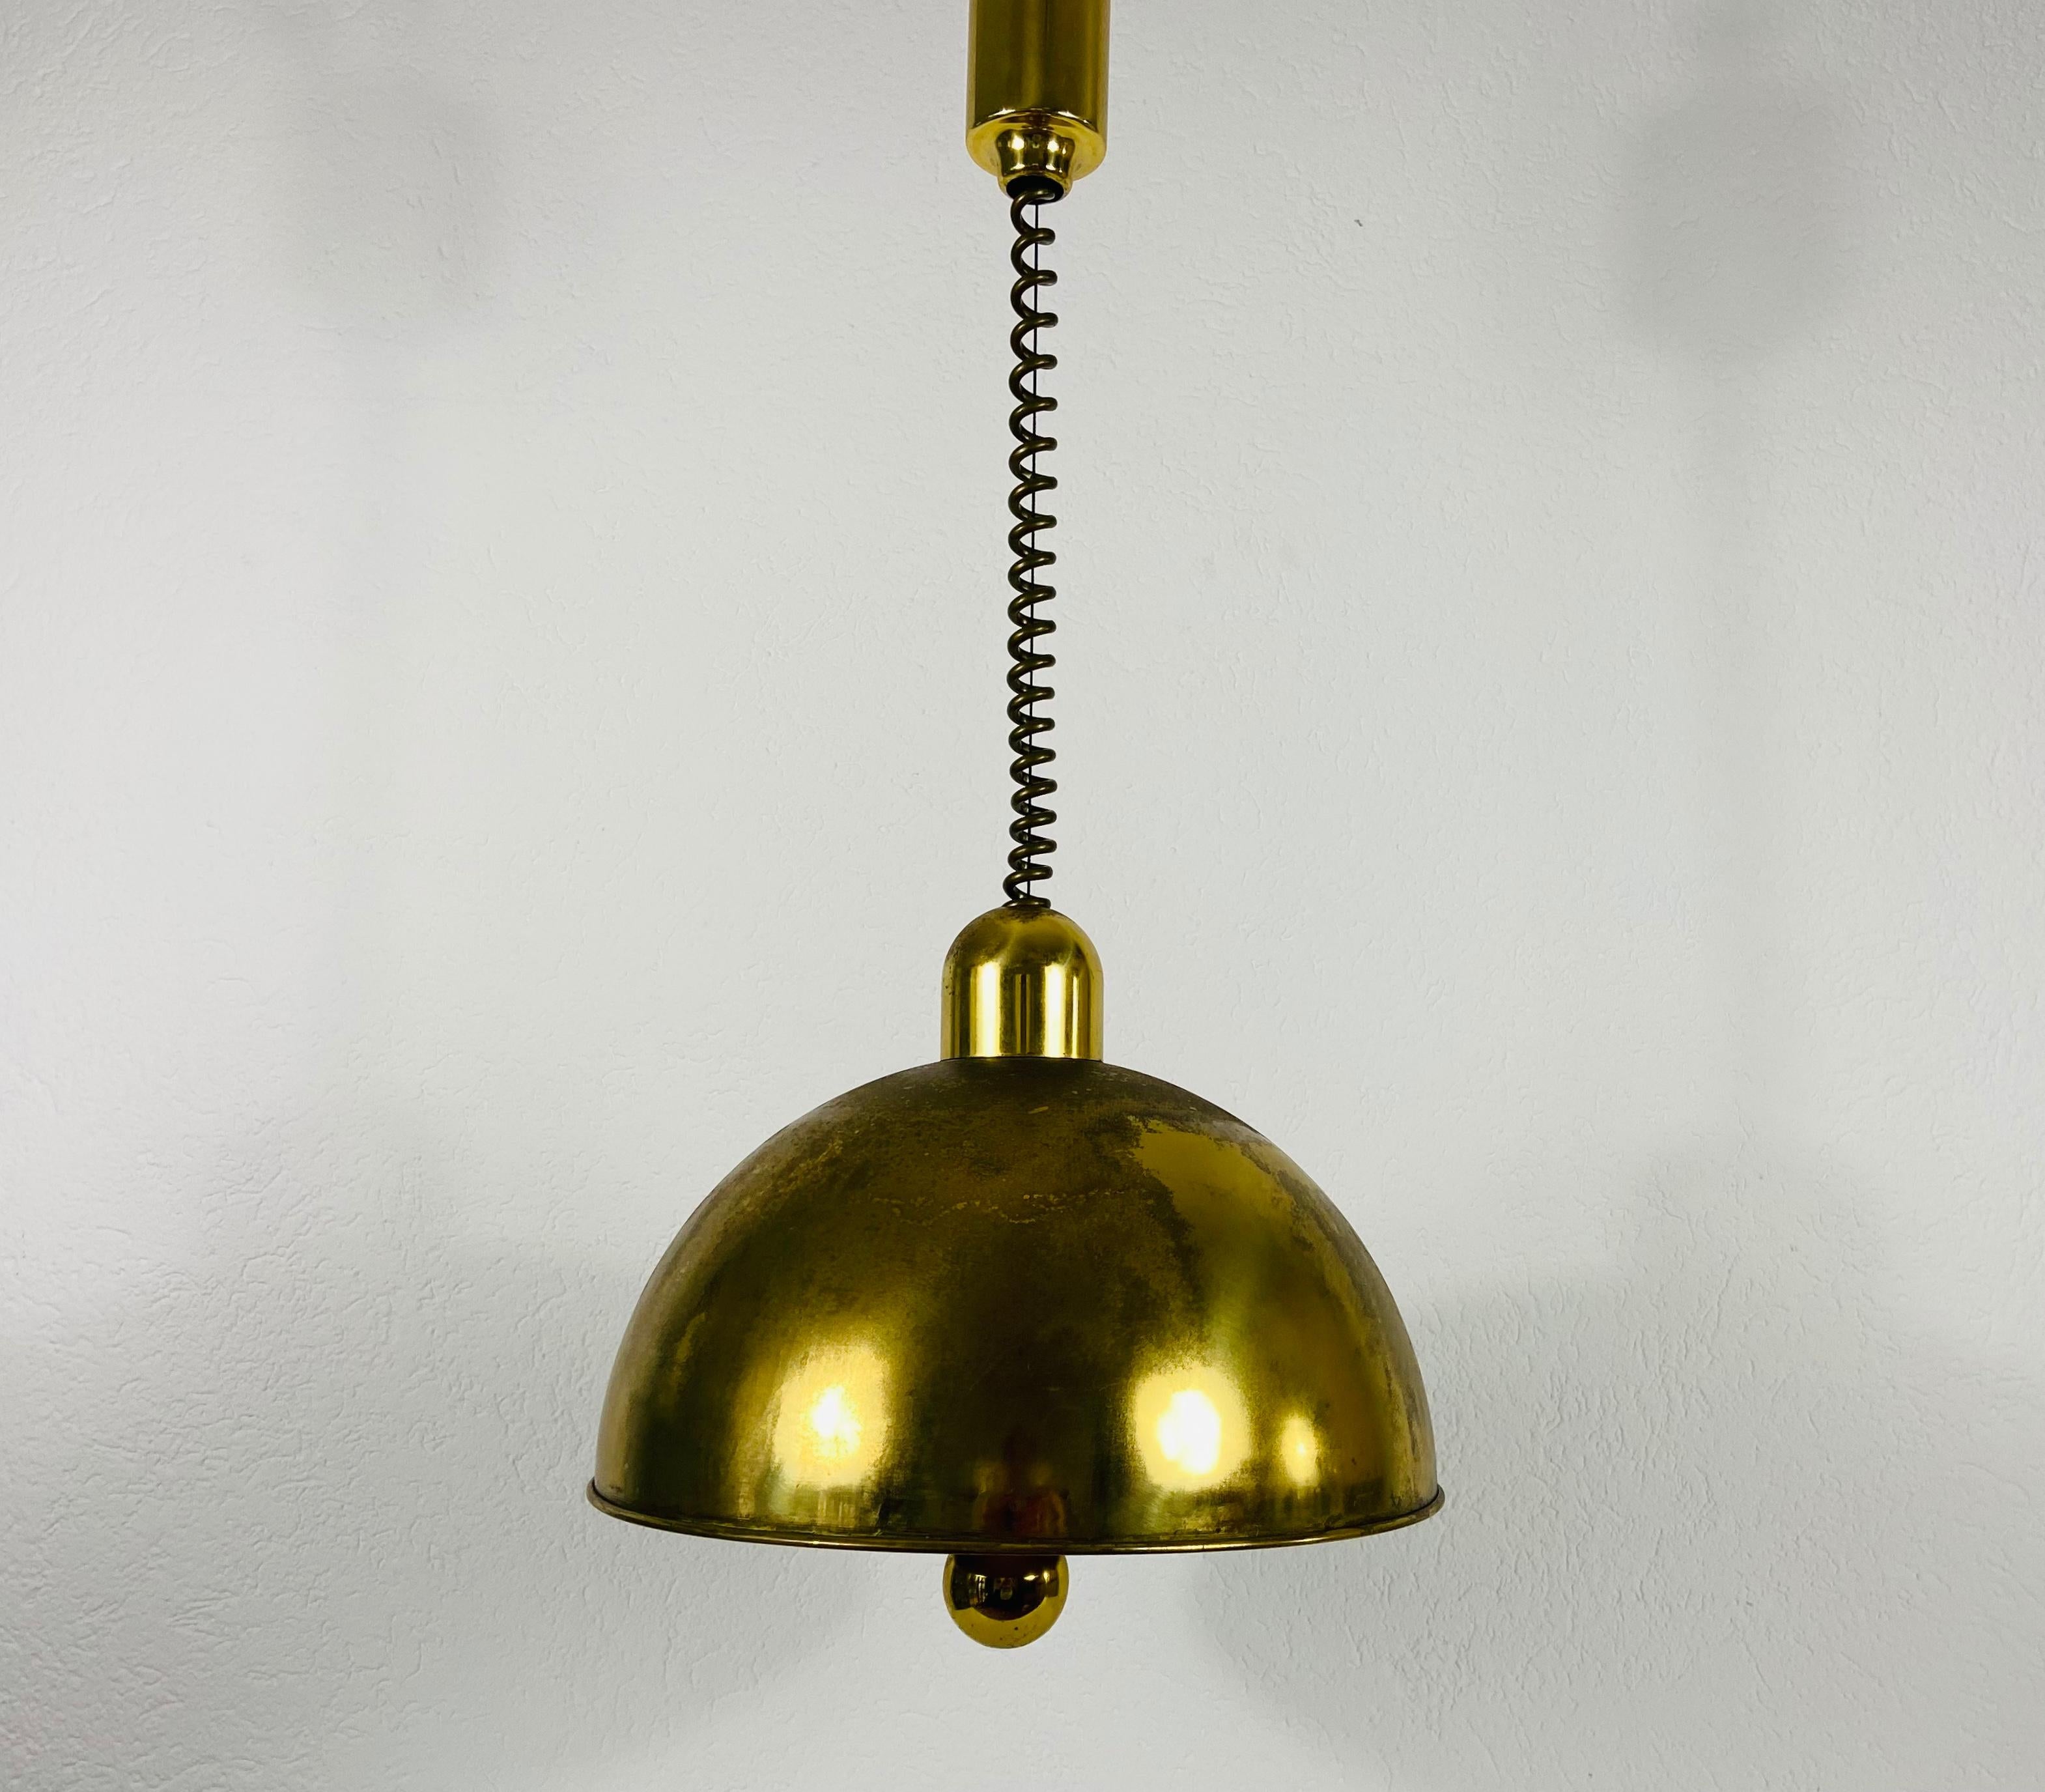 Brass pendant lamp by WKR made in Germany in the 1970s. It is fascinating with its exclusive design. The height of the lighting is adjustable.

Max height: 61 cm
Measurements of shade:
Height 36 cm
Diameter 42 m

The light requires three